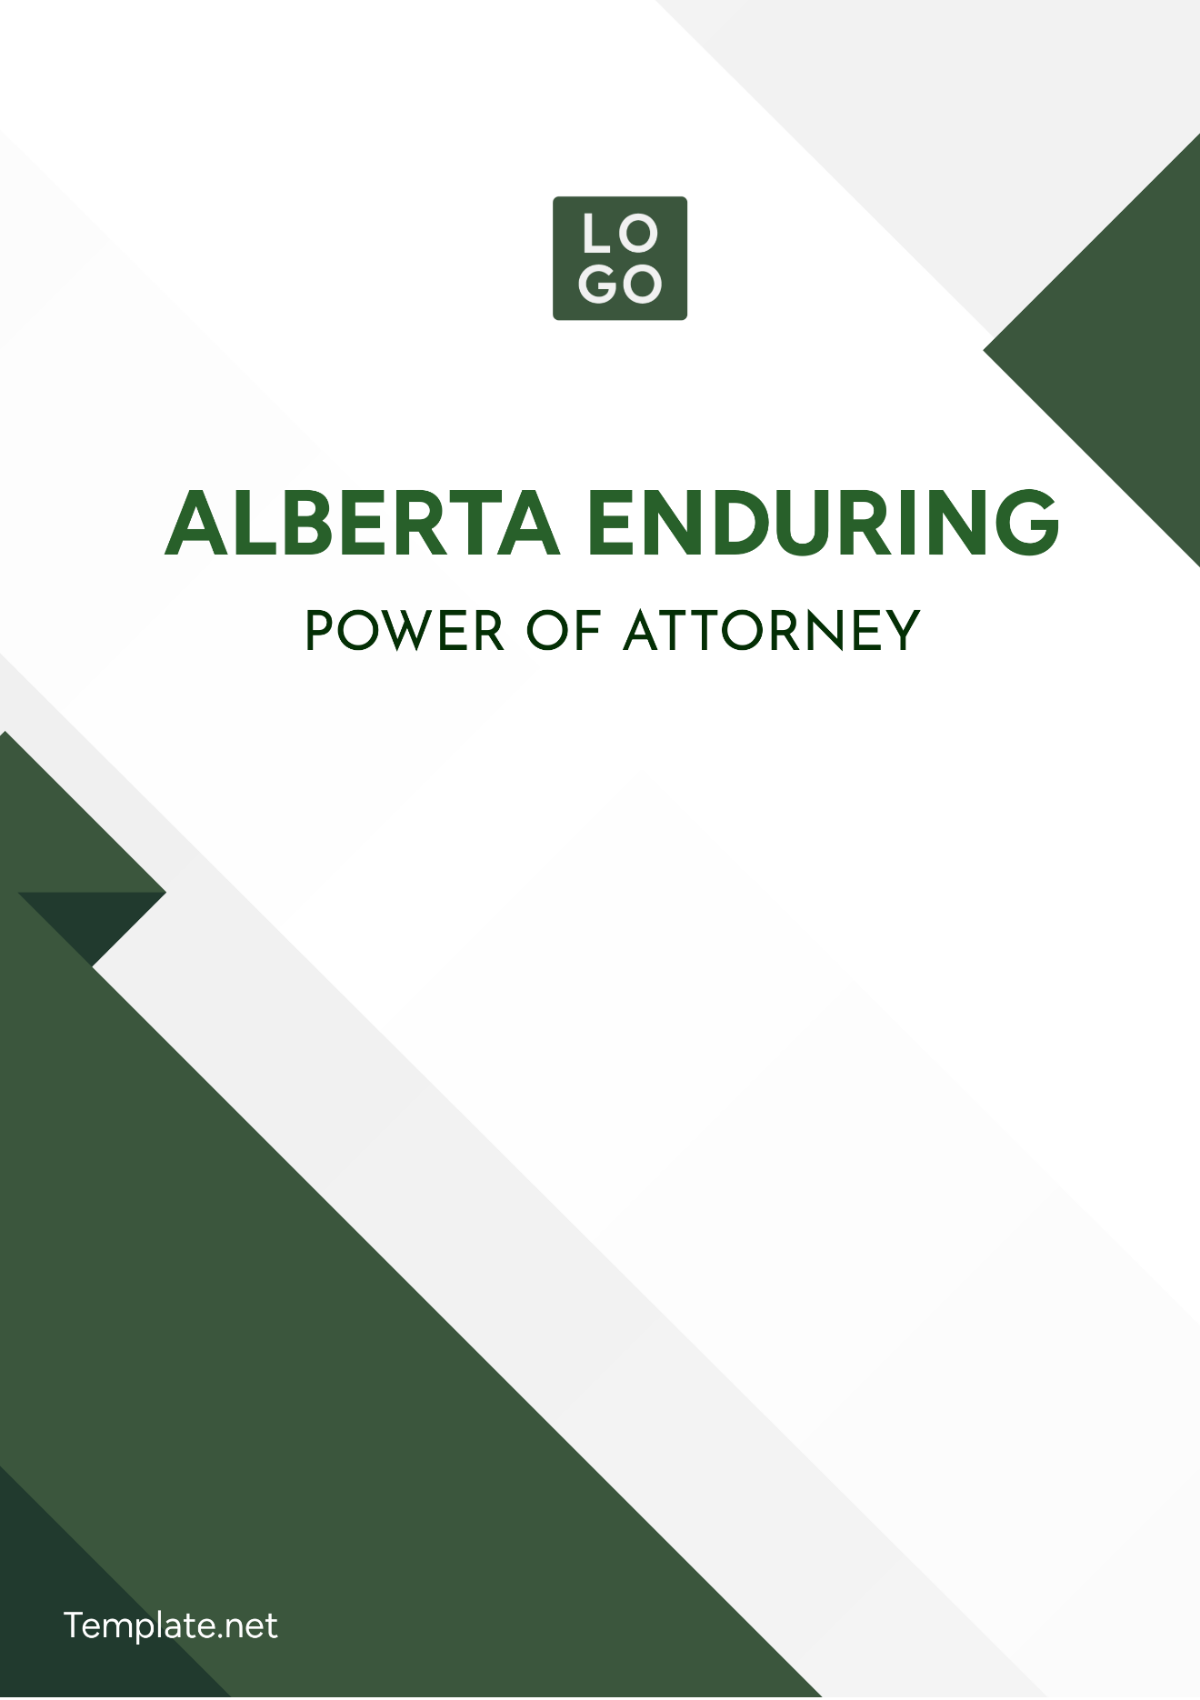 Alberta Enduring Power of Attorney Template